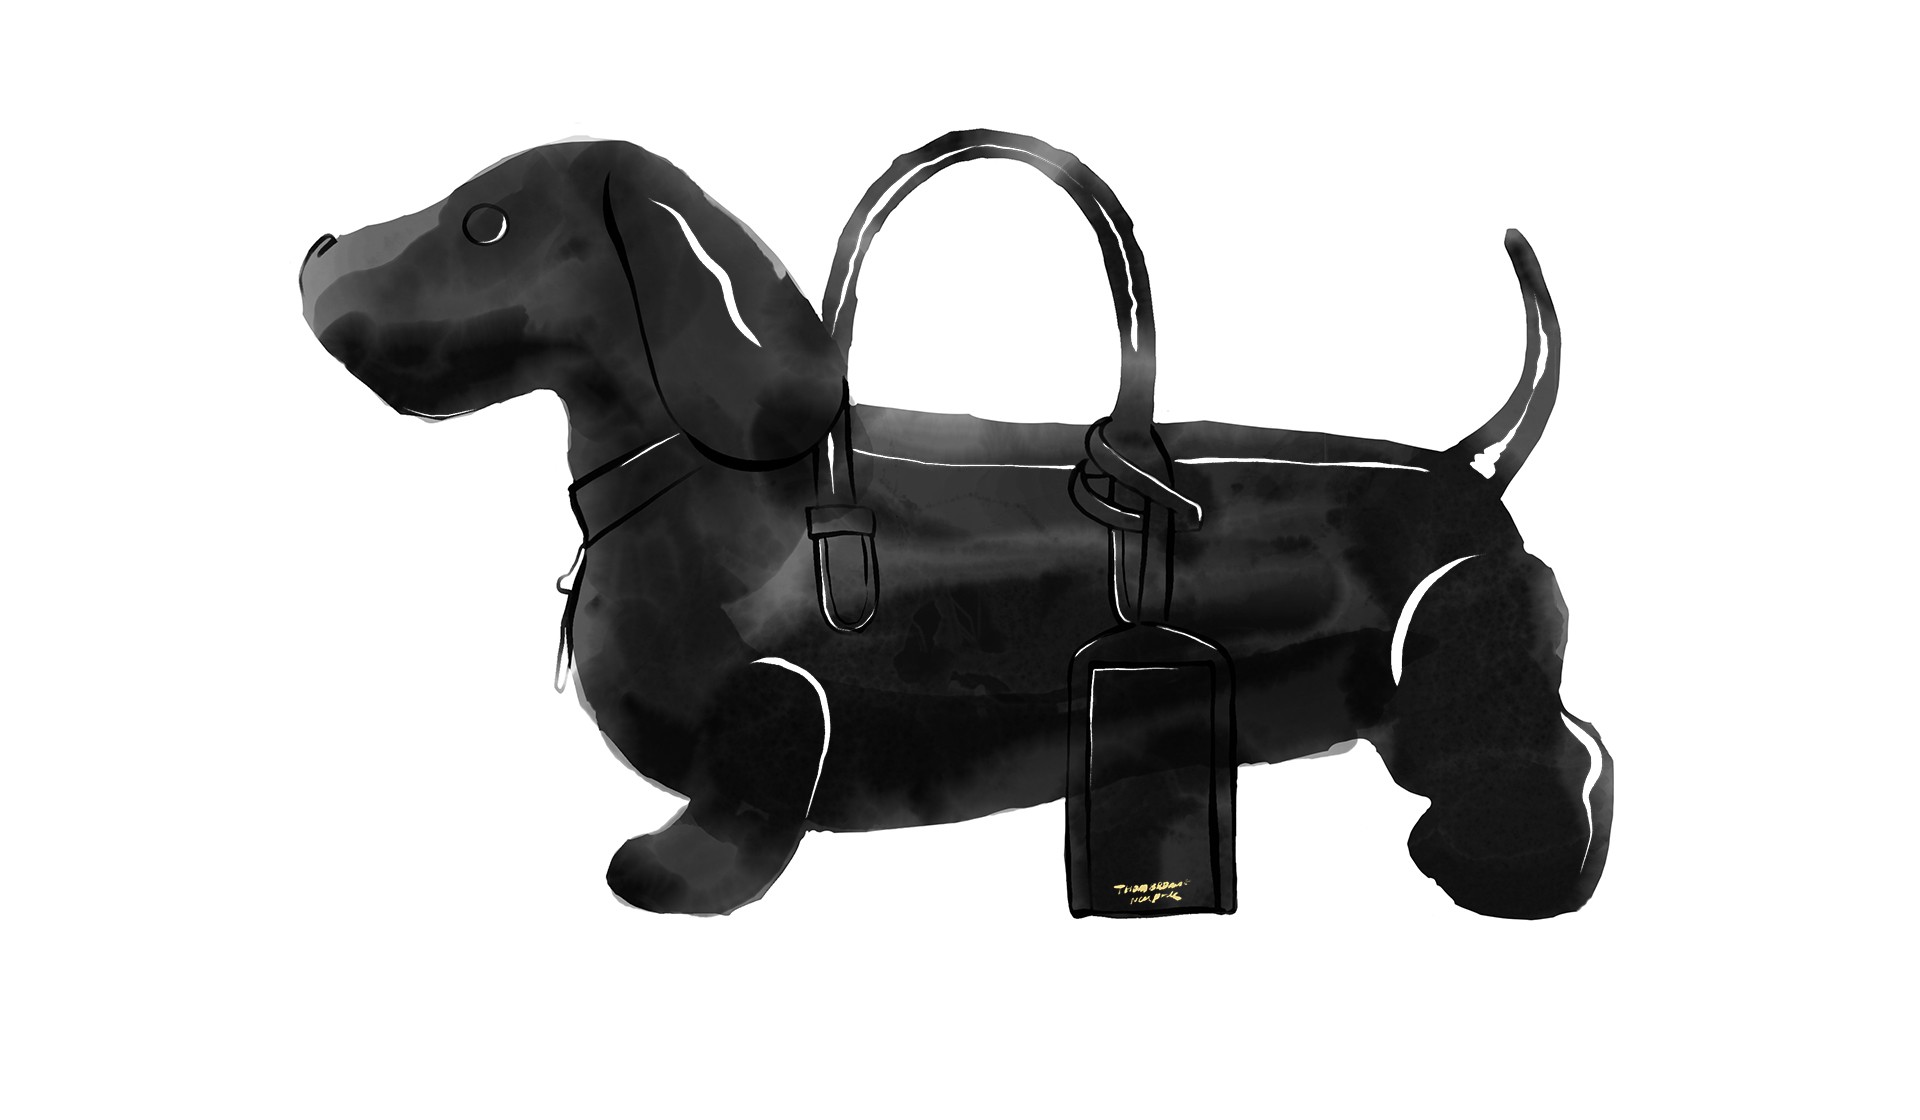 Discover the new animal icons from Thom Browne